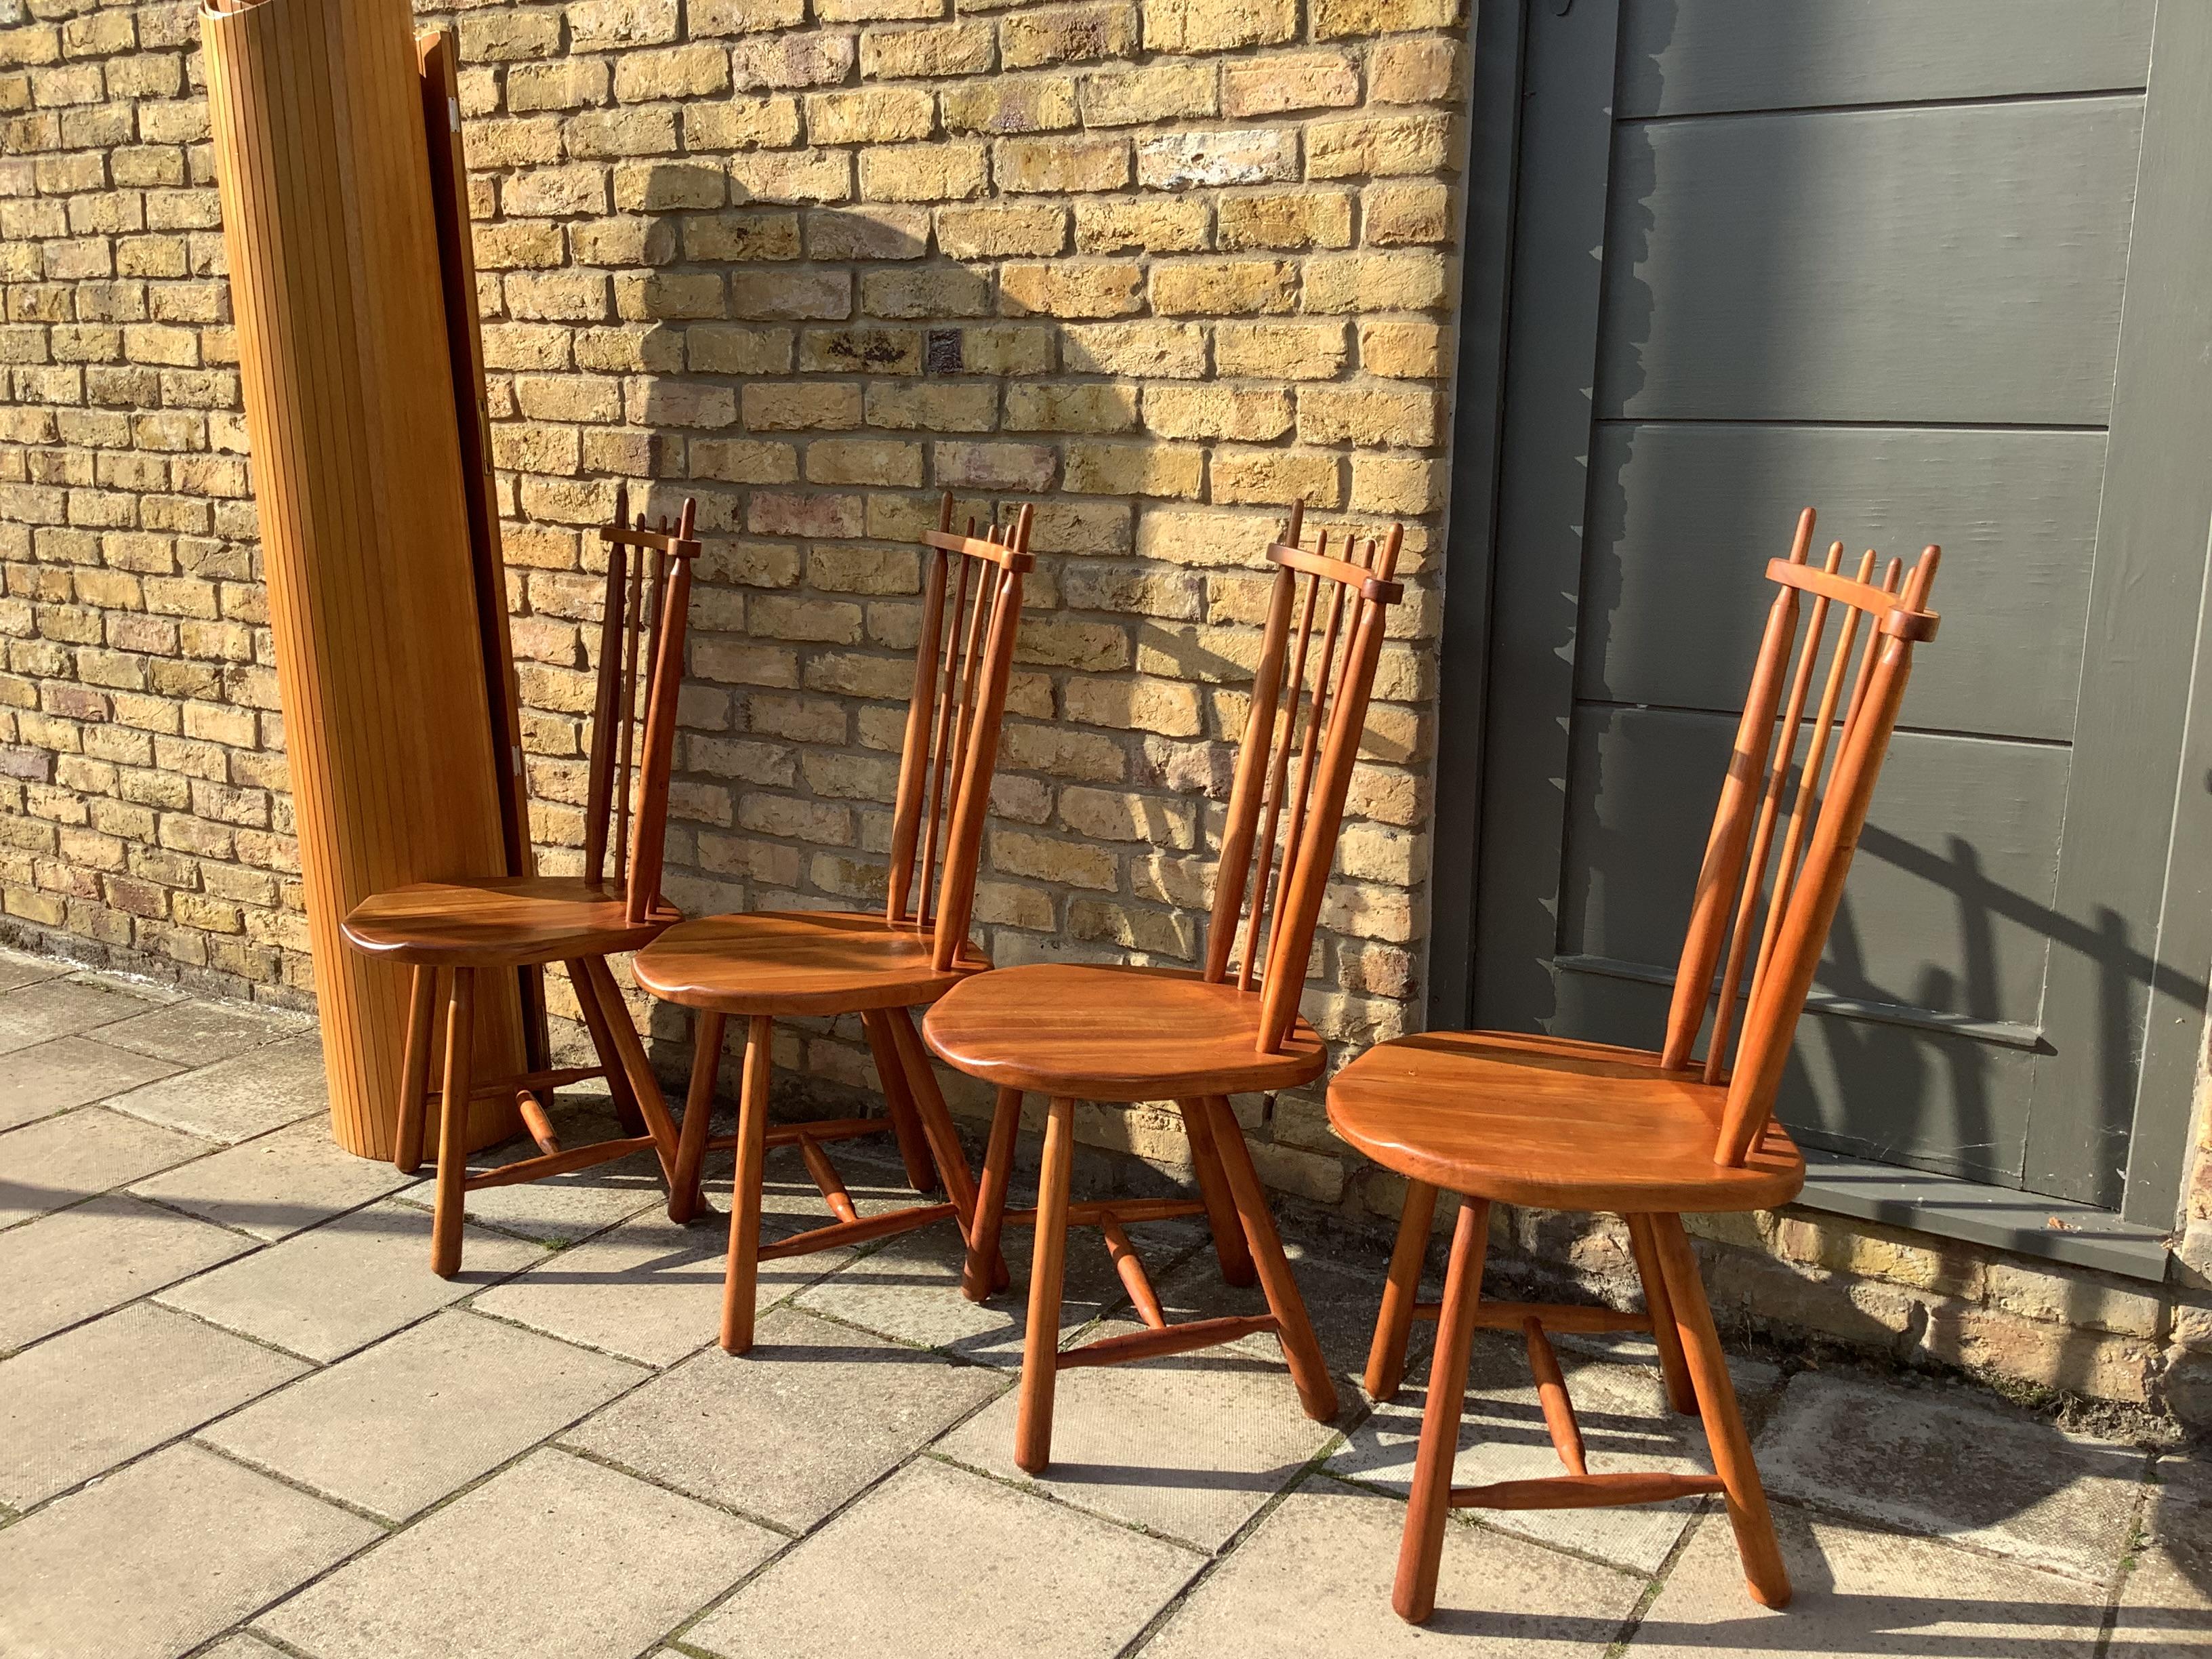 wonderful set of 4 dining chairs from Dutch Manufacturer, De Ster Gelderland from the centre-east of the Netherland produced many of the most well -known
 Dutch chairs of the mid-20th century. Their expertise in woodworking is evident 
in this set